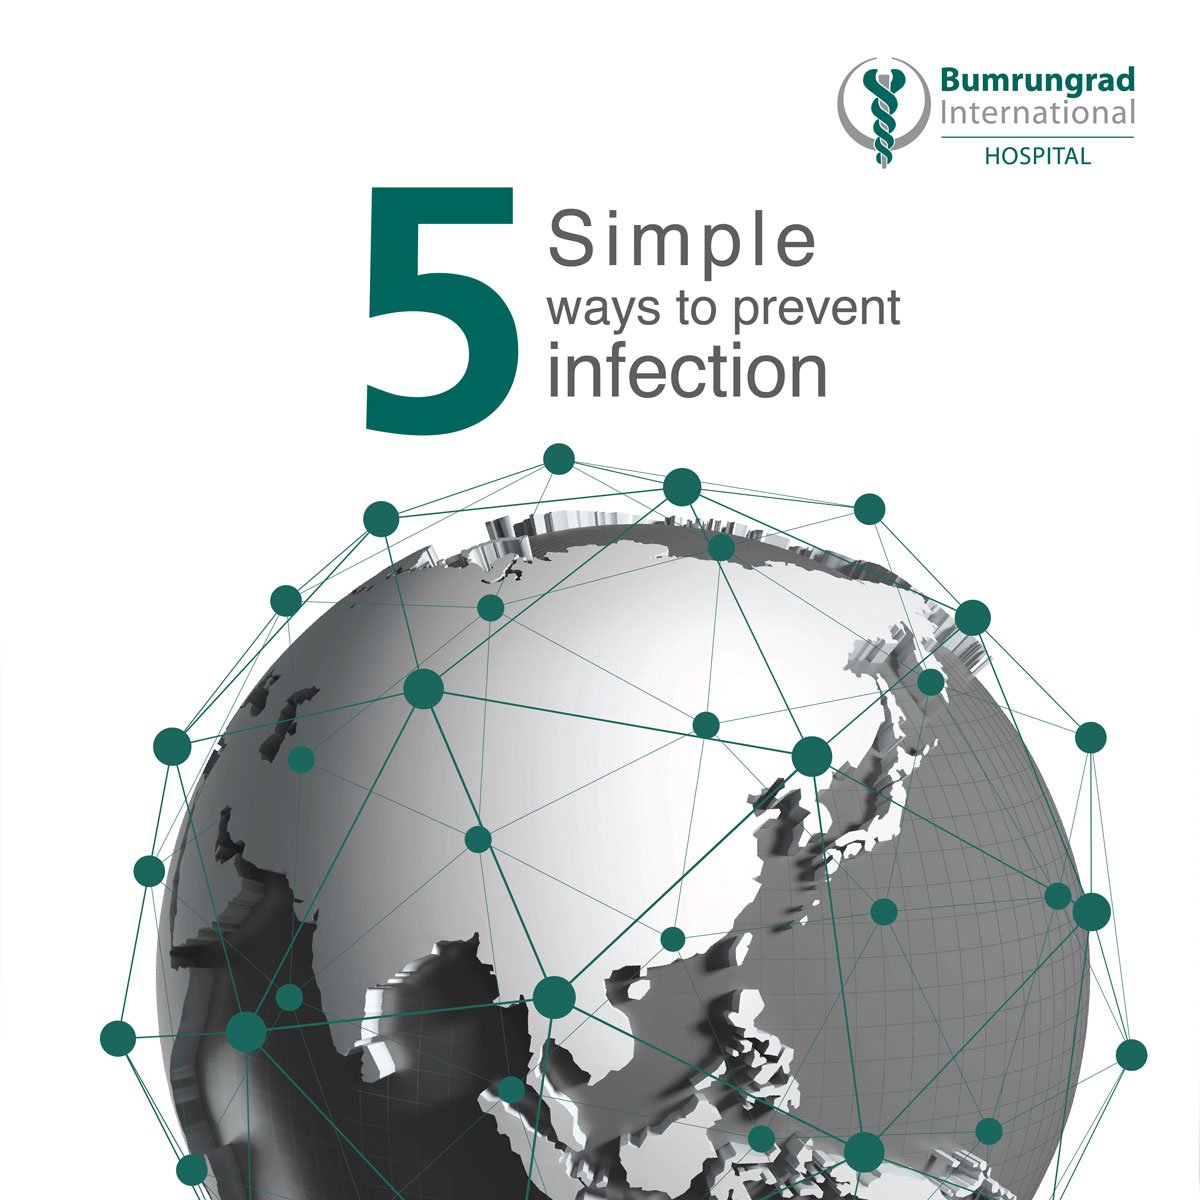 5-Simple-ways-to-prevent-infection1200x1200.jpg